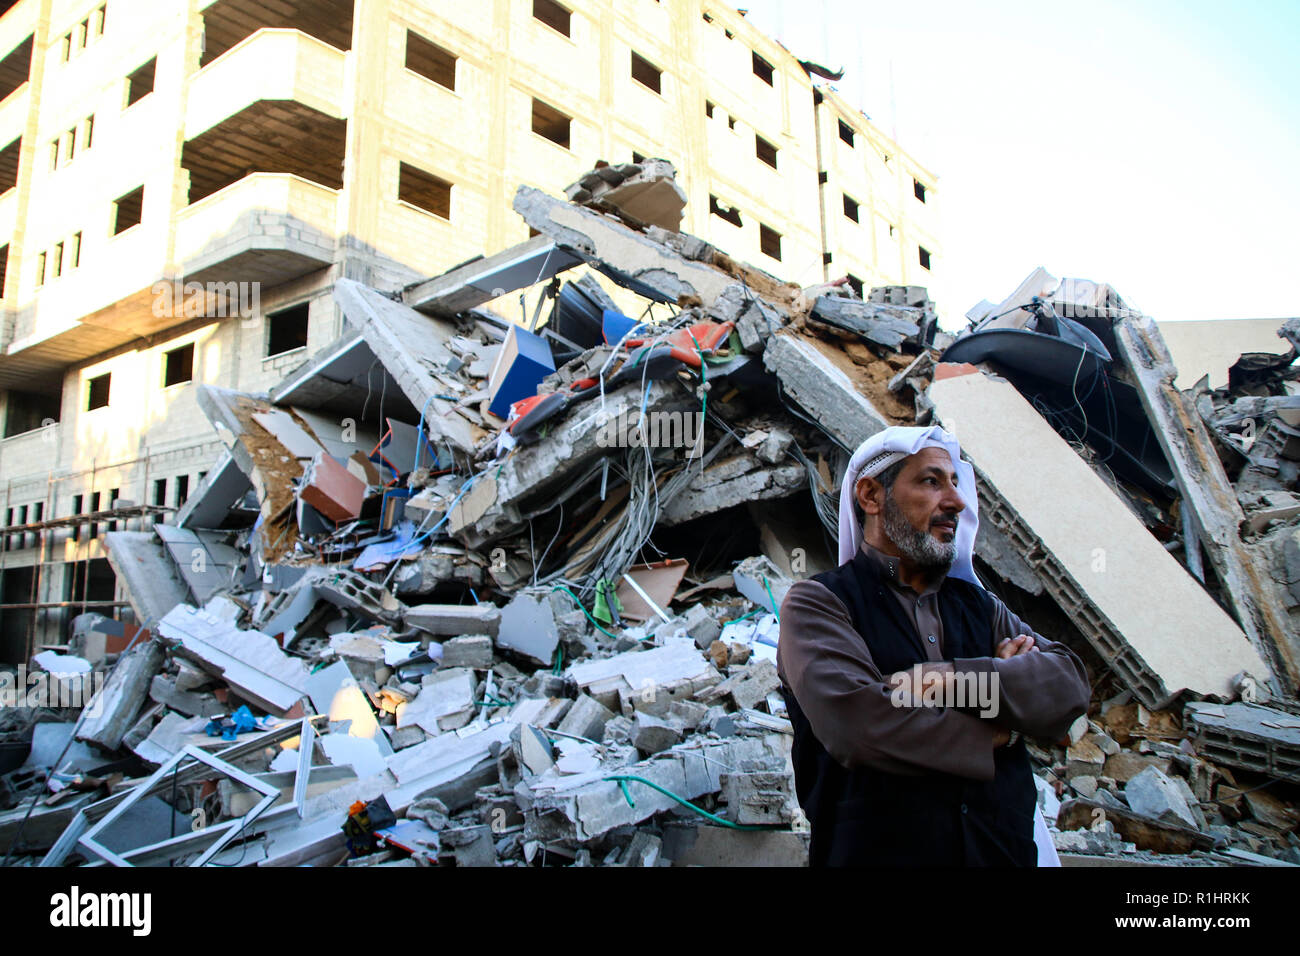 A man seen standing next to the rubble site of a building which was bombed by the Zionist occupation planes during the raids in the Gaza Strip. Stock Photo